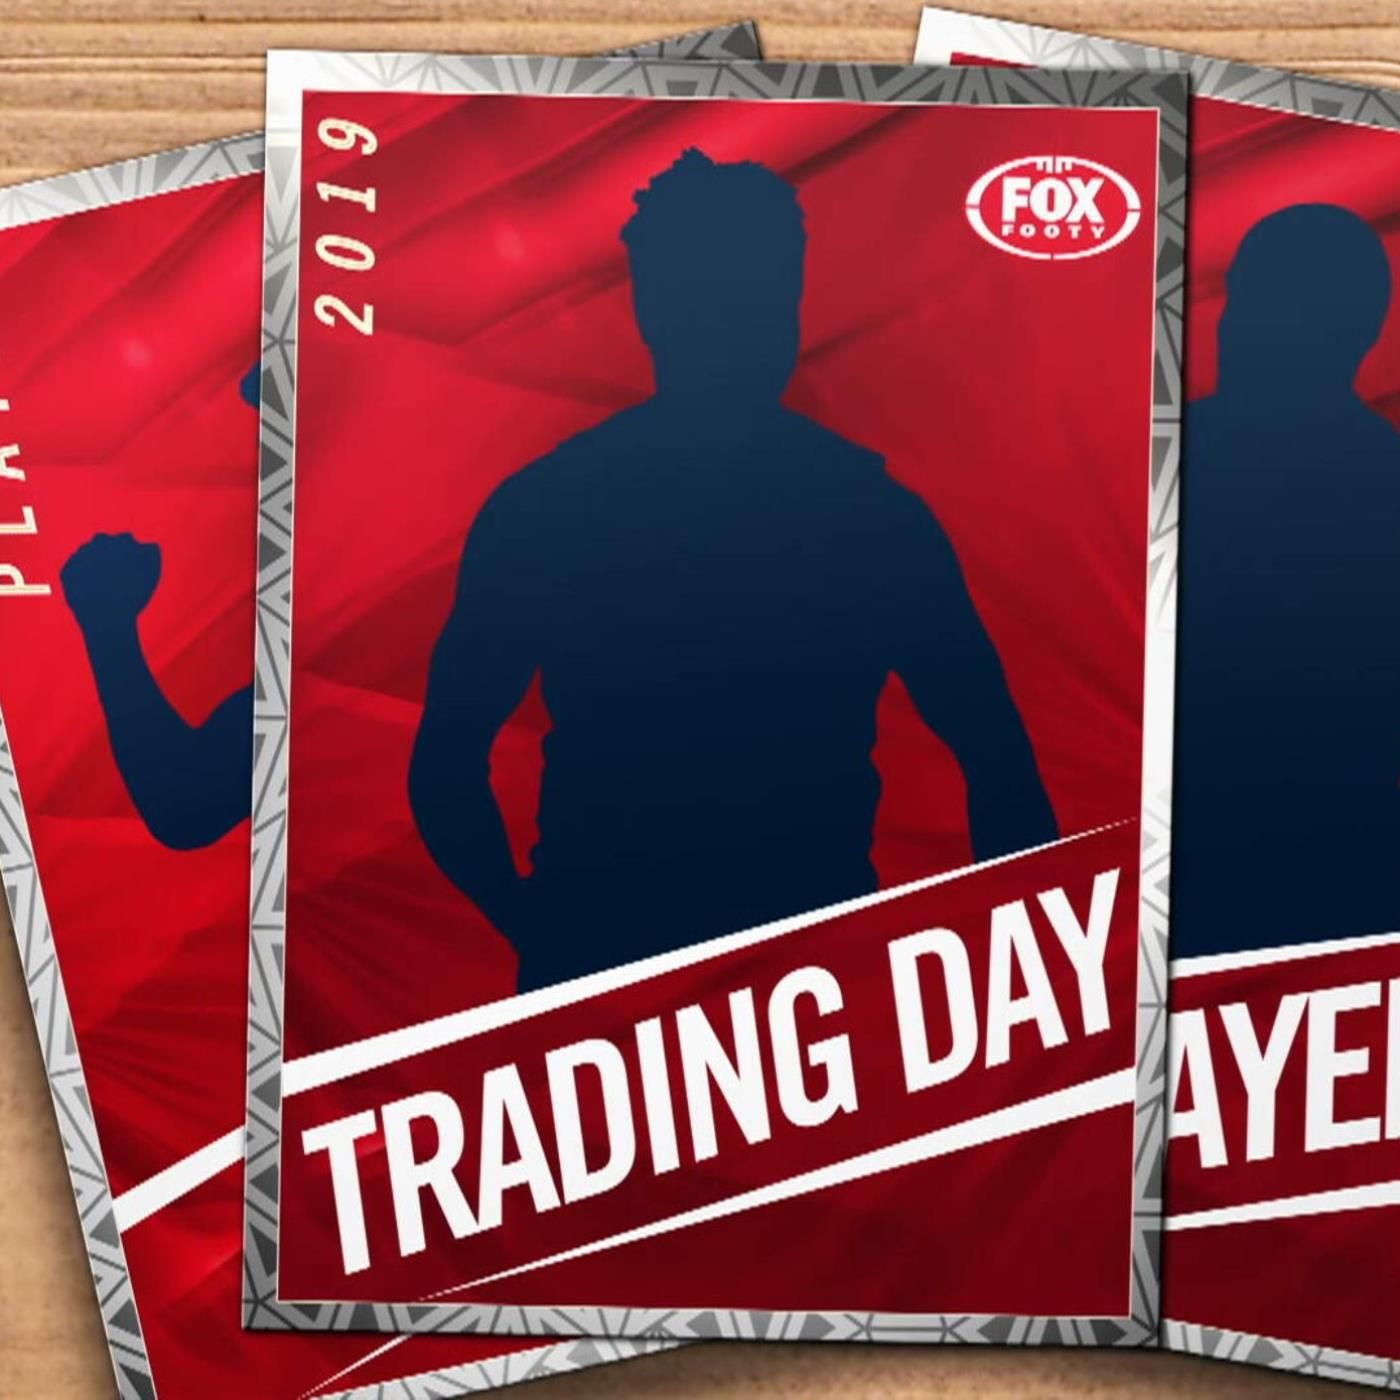 Trading Day 16/10: CLUB REPORT CARDS | 'St Kilda wins Trade Period'